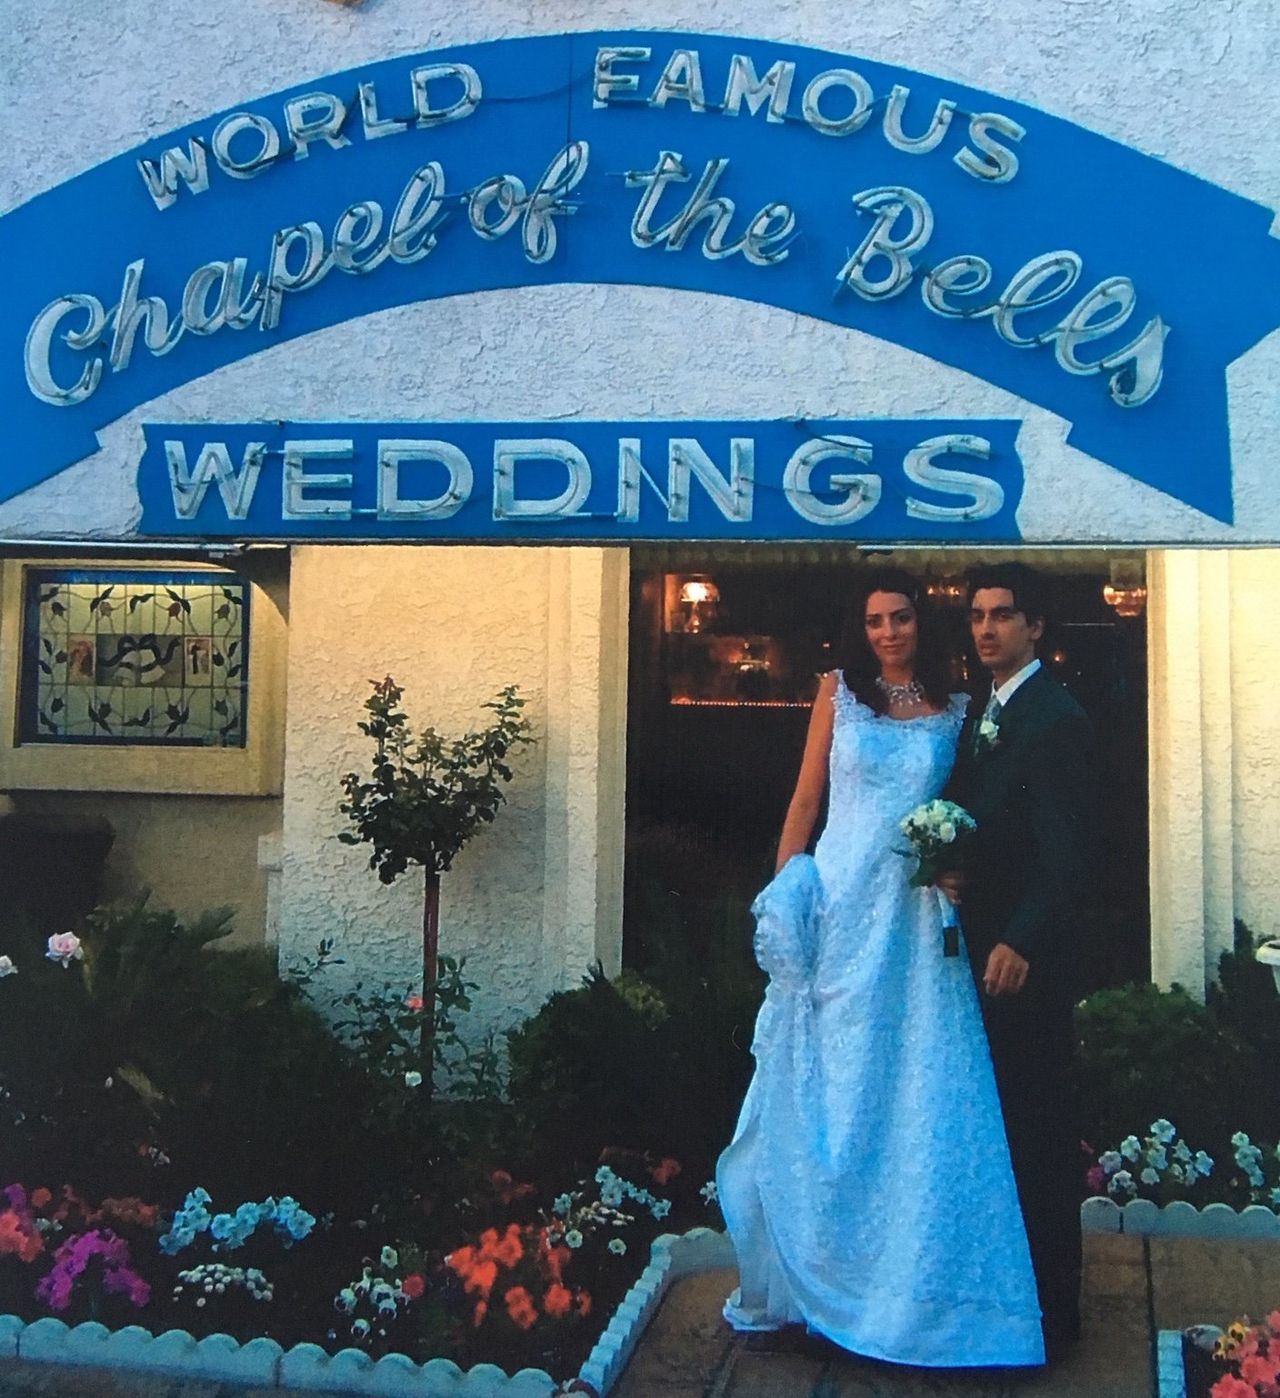 Arianna and Steve in front of the Chapel of the Bells in Las Vegas on their wedding day, Oct. 31, 2003.